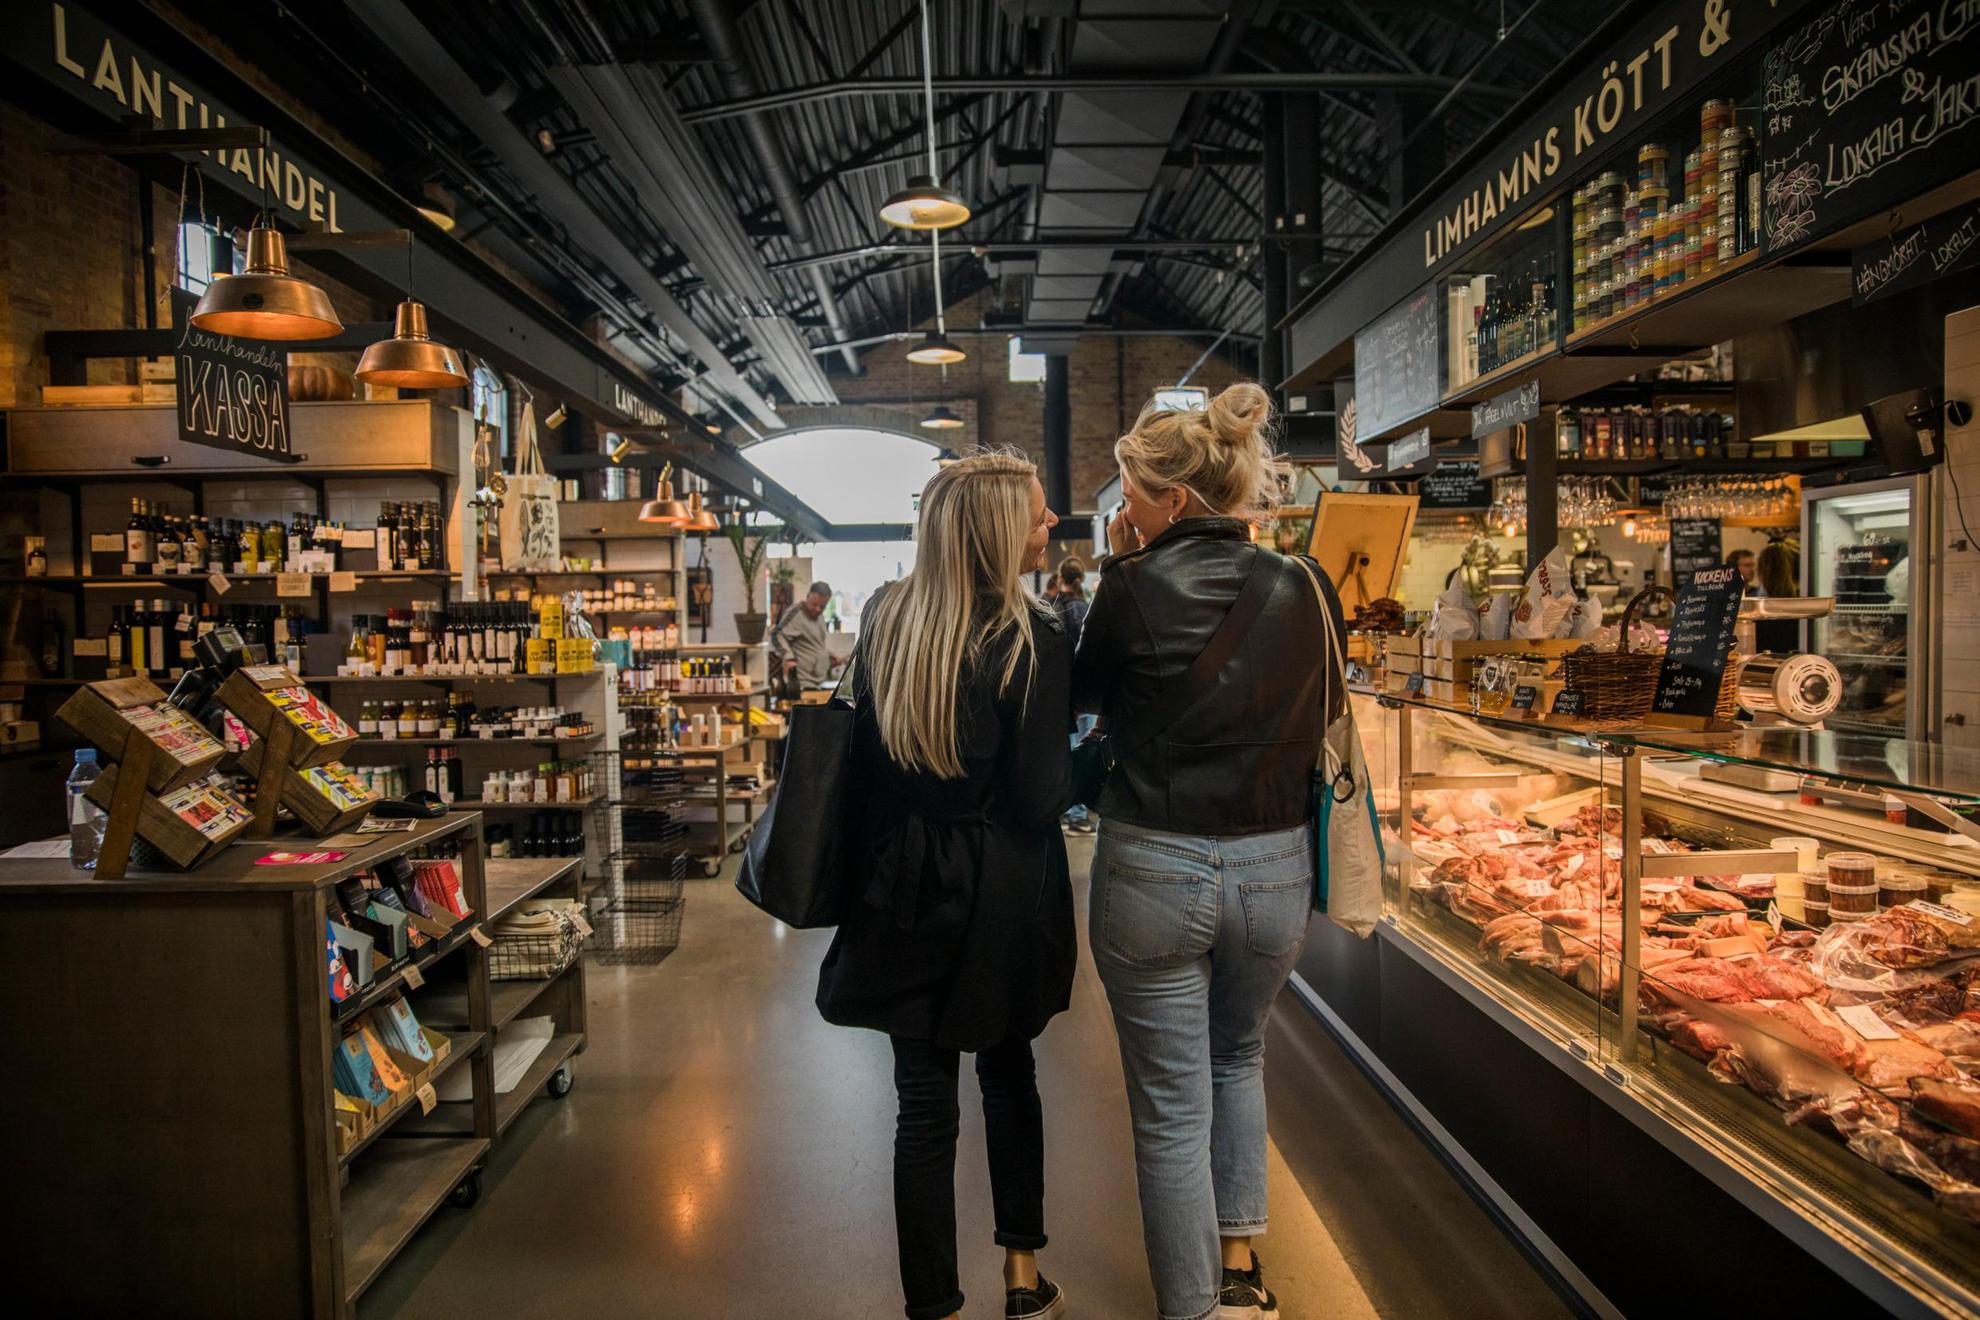 The back of two women that walk and talk in a food market.